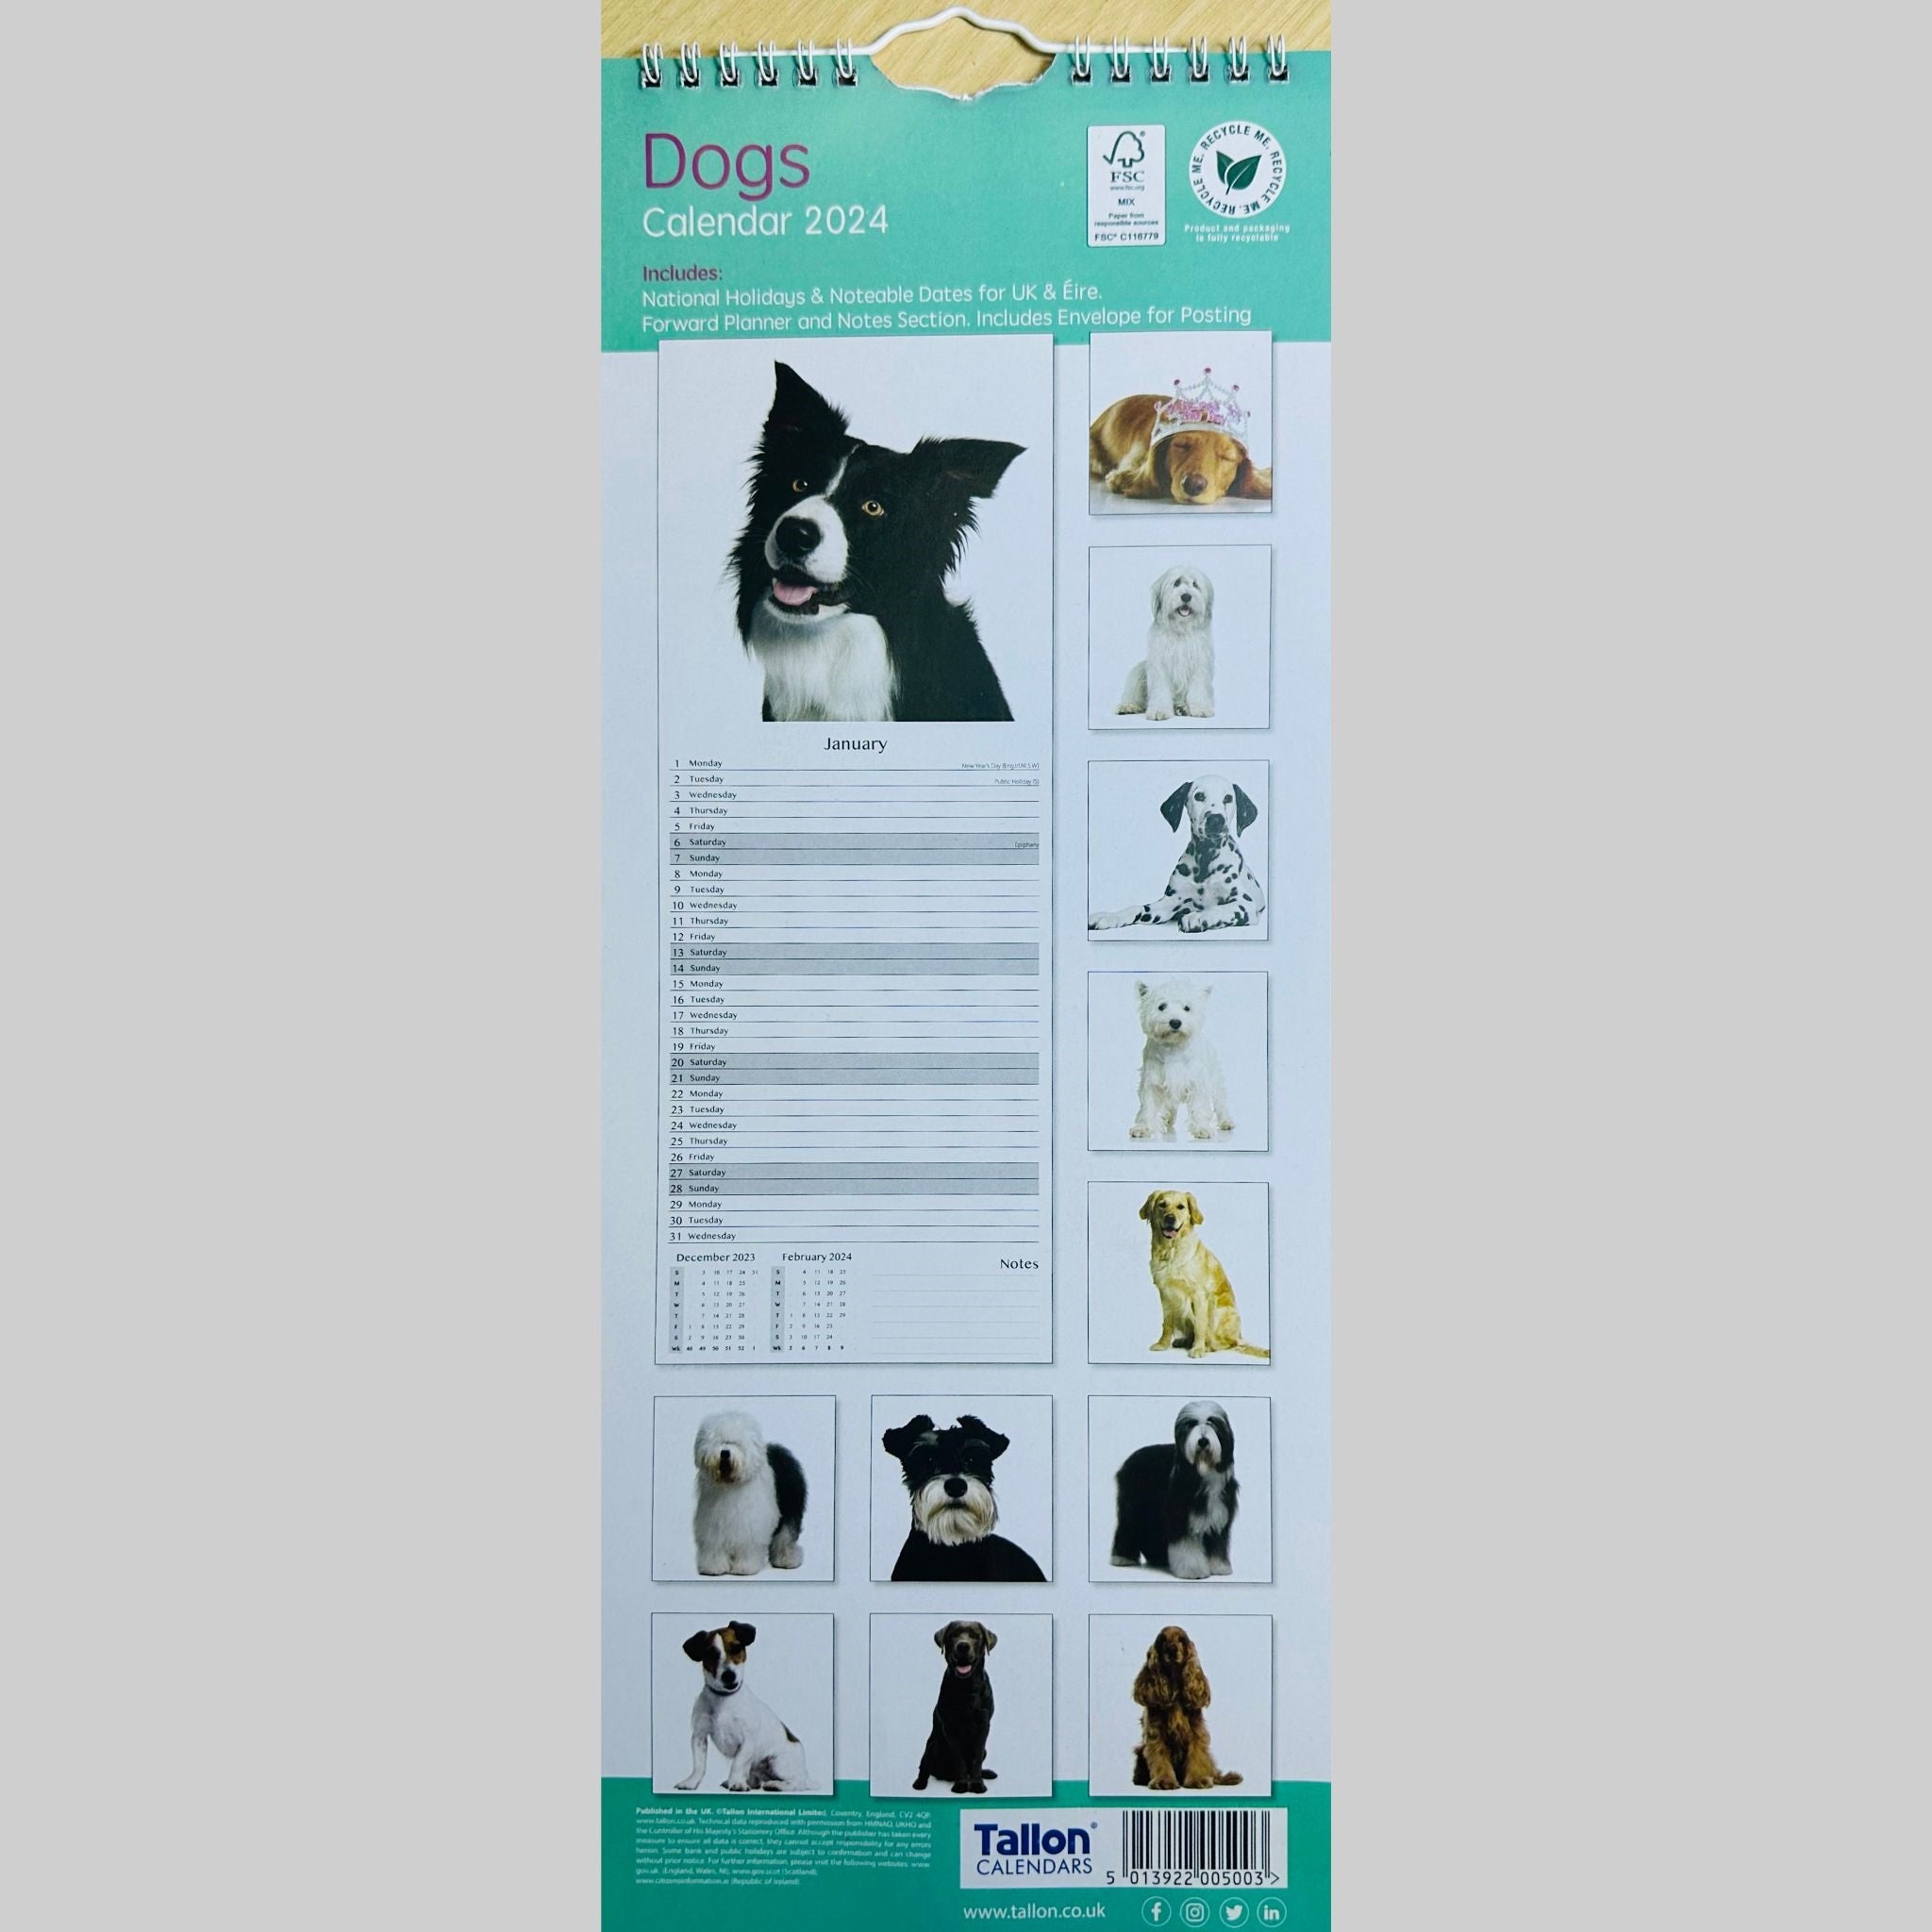 Beclen Harp Super Slim Month to View Spiral Bound Hanging Wall Calendar Home Office 2024  Dogs,Cats,Kittens,Puppies